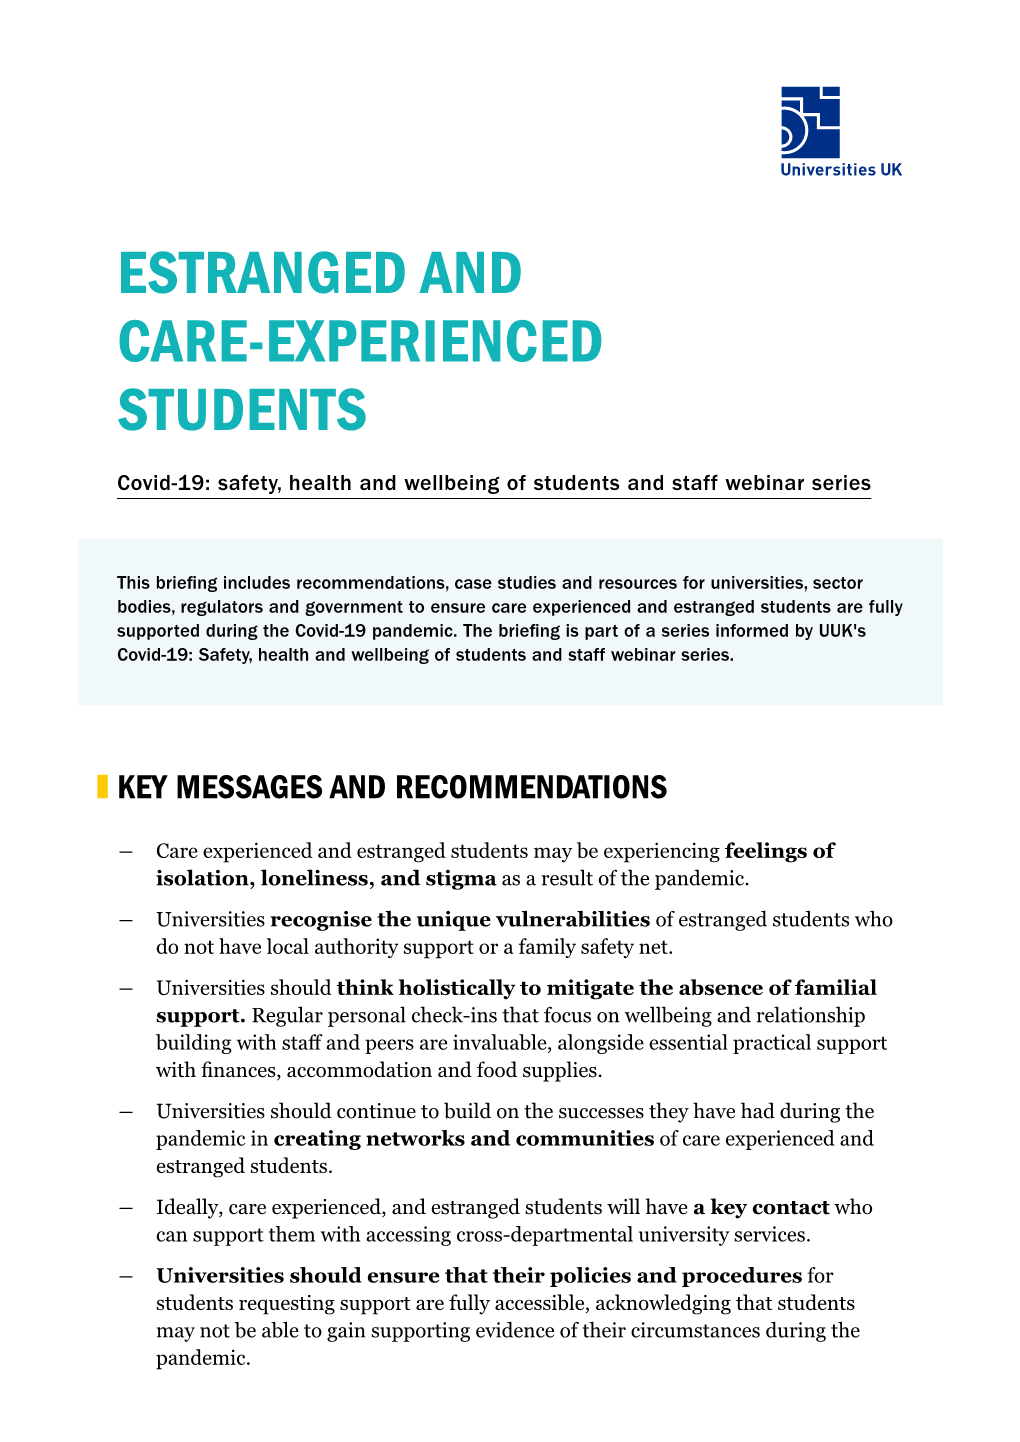 Estranged and Care-Experienced Students: Covid-19 Mental Health and Wellbeing of Students and Staff